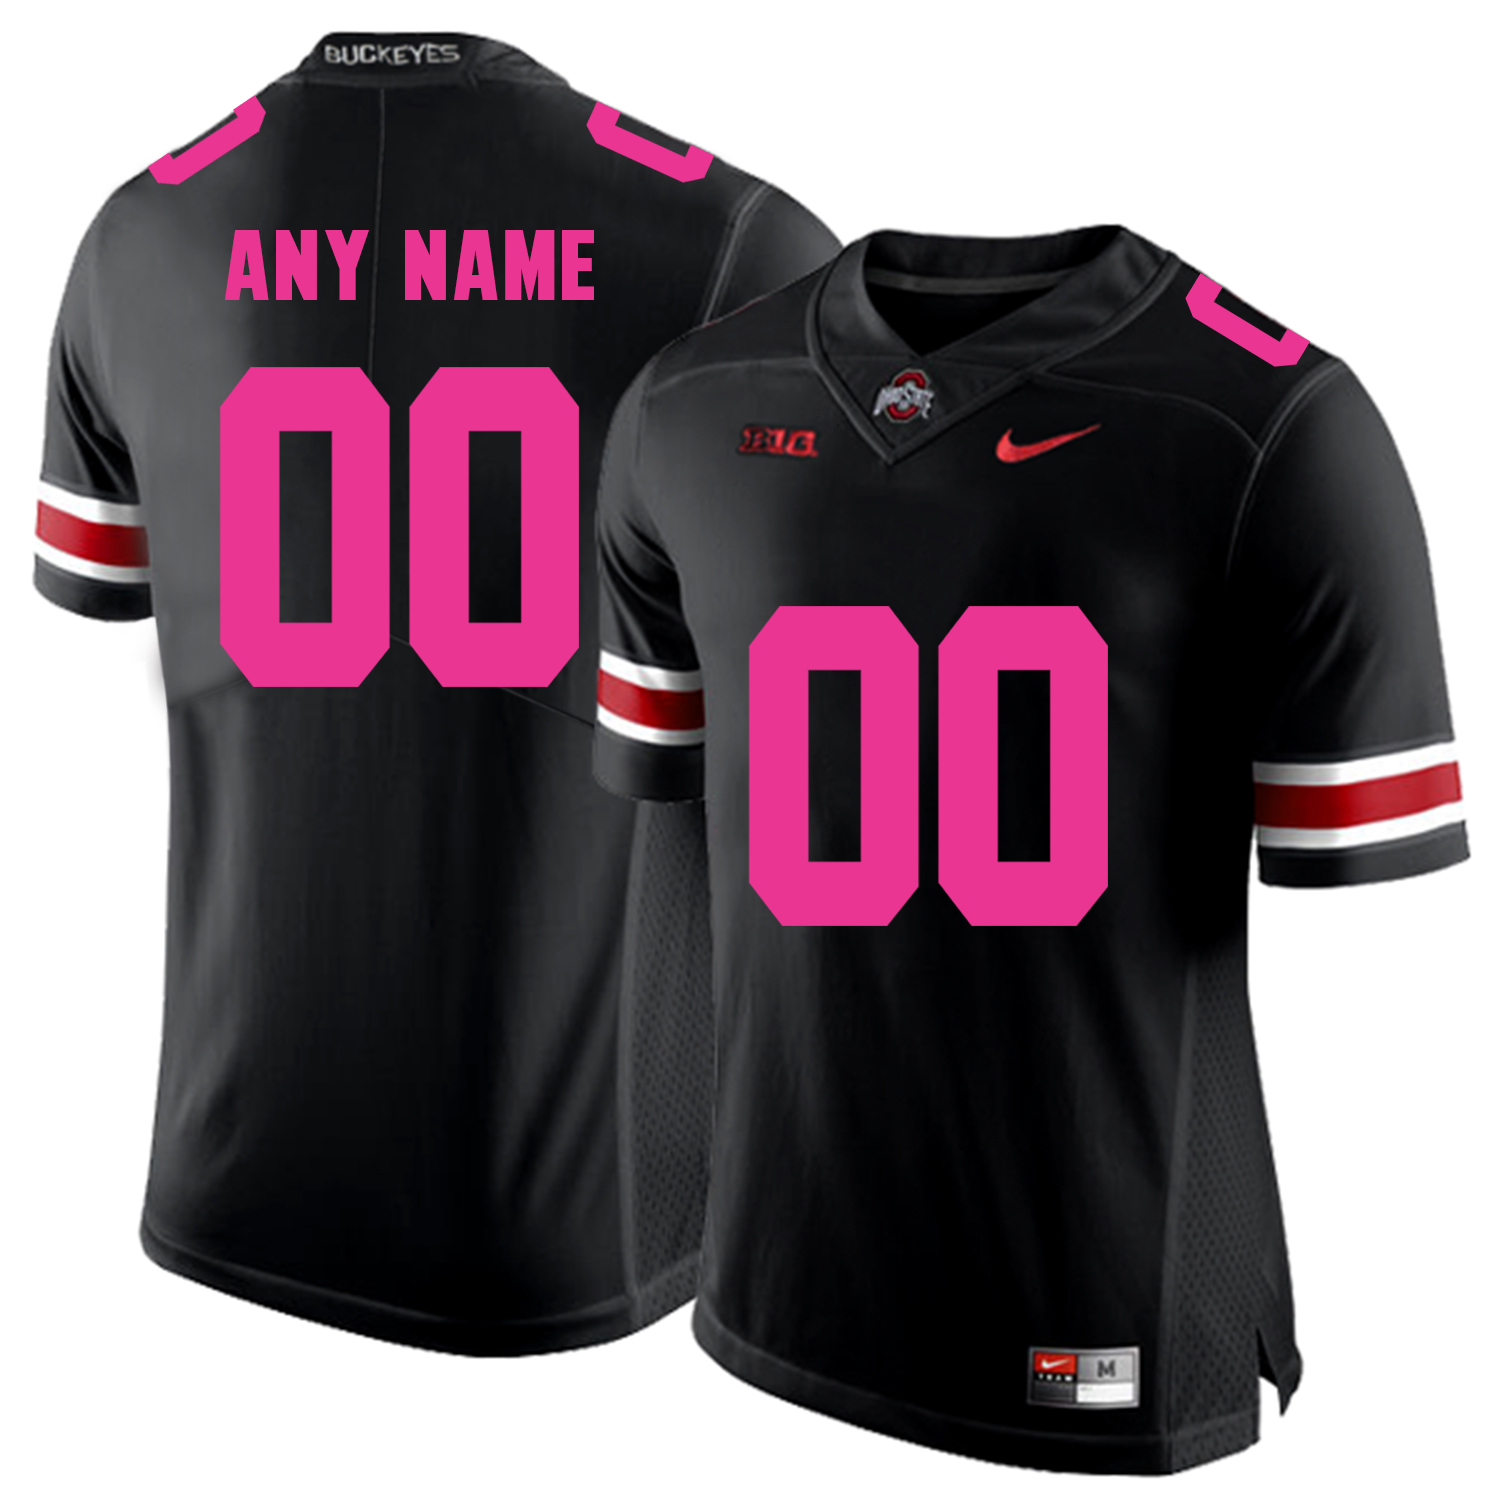 Ohio State Buckeyes Black 2018 Breast Cancer Awareness Men's Customized College Football Jersey